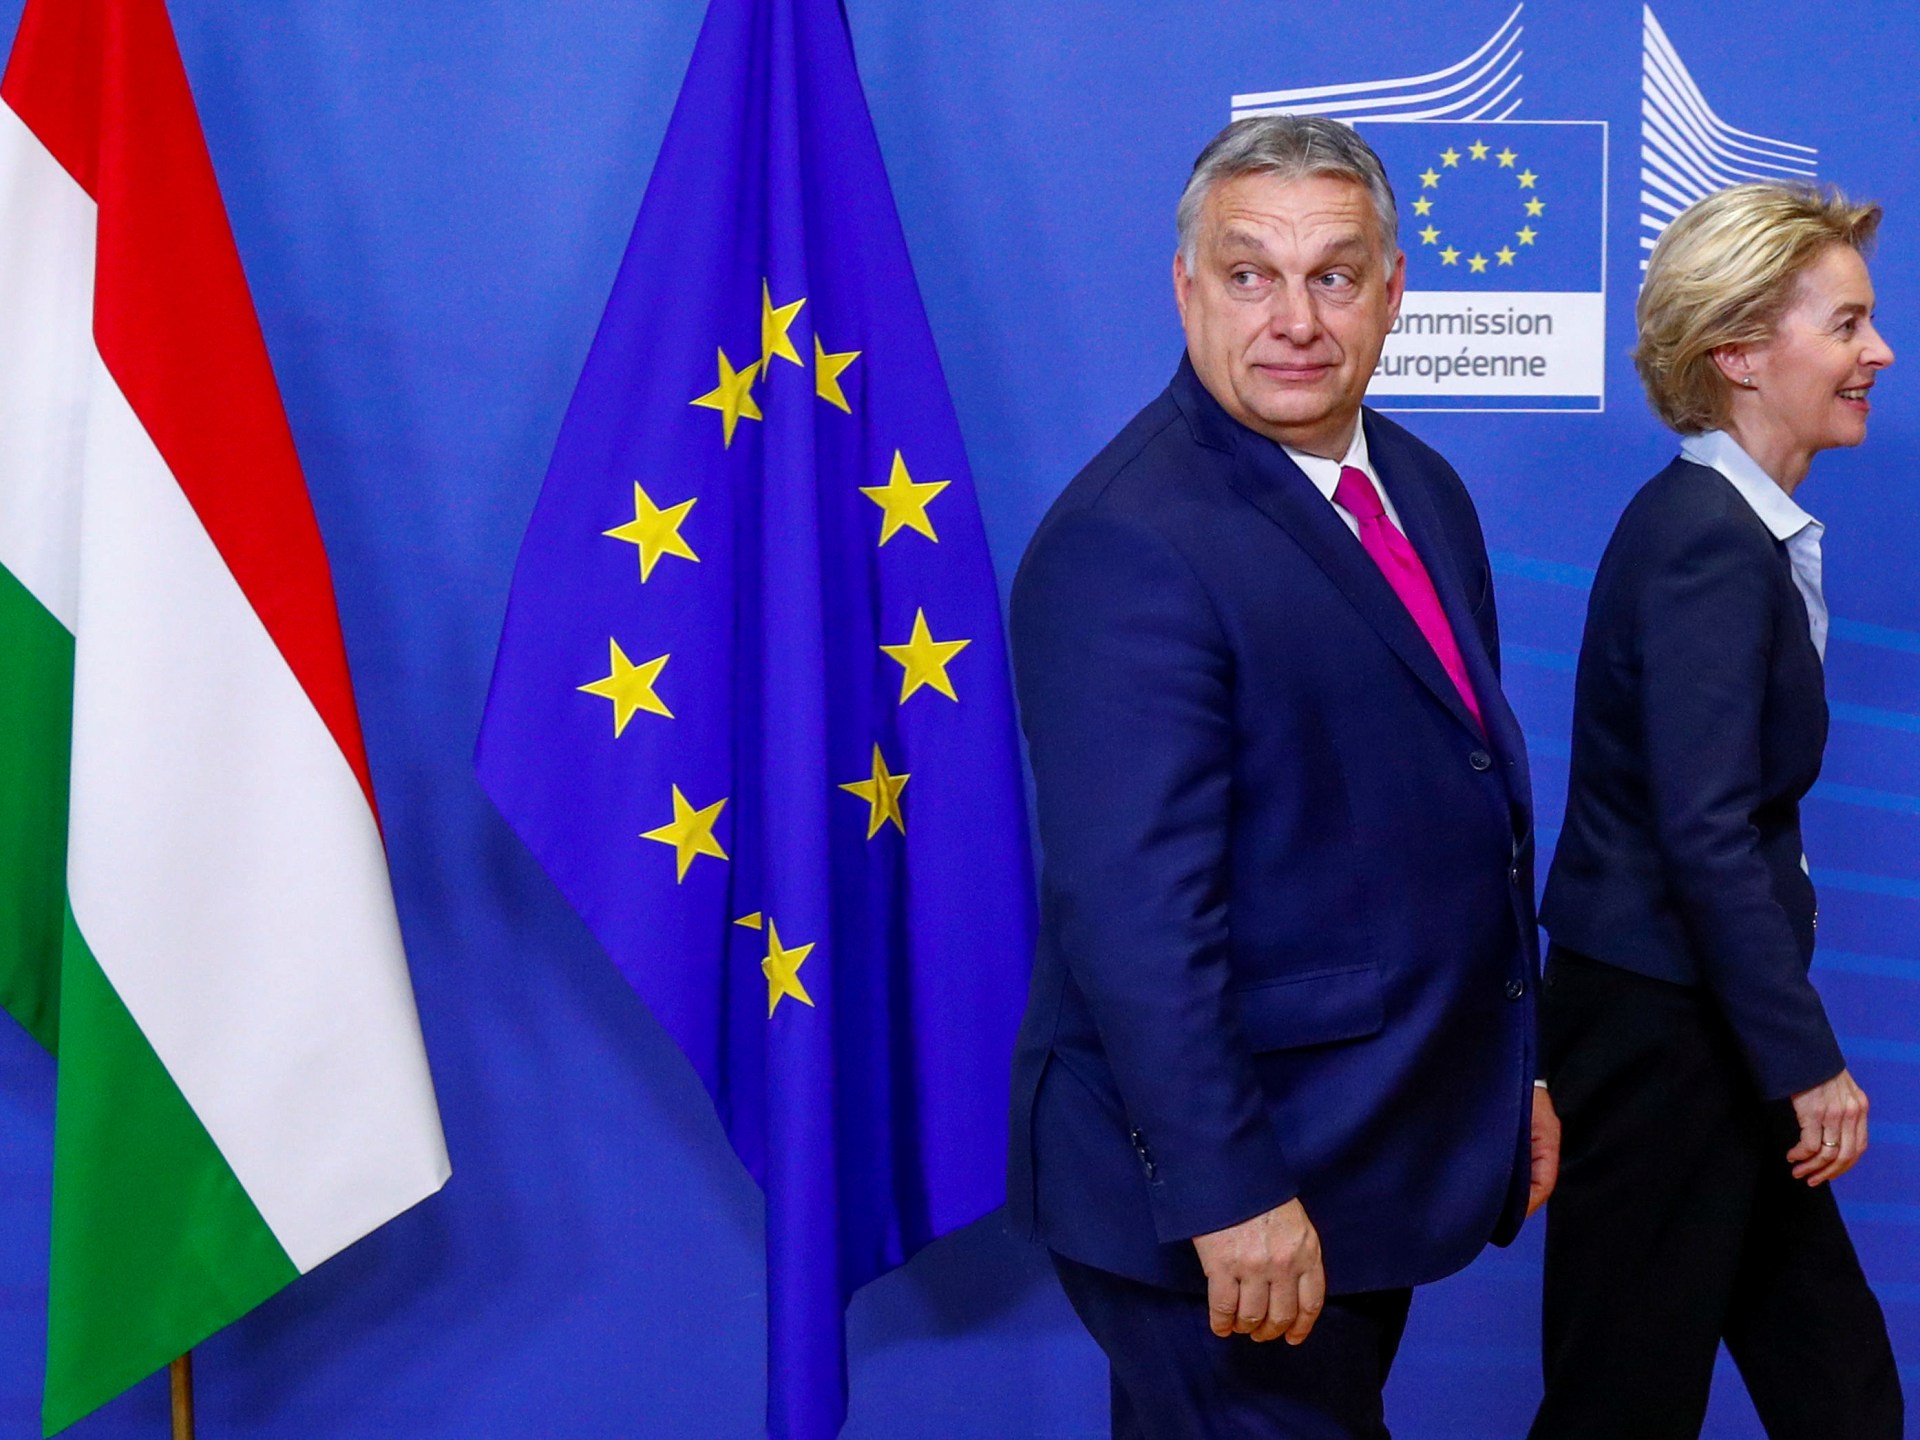 EU holds up billions in aid for Hungary amid tug-of-war over Ukraine | European Union News #holds #billions #aid #Hungary #tugofwar #Ukraine #European #Union #News